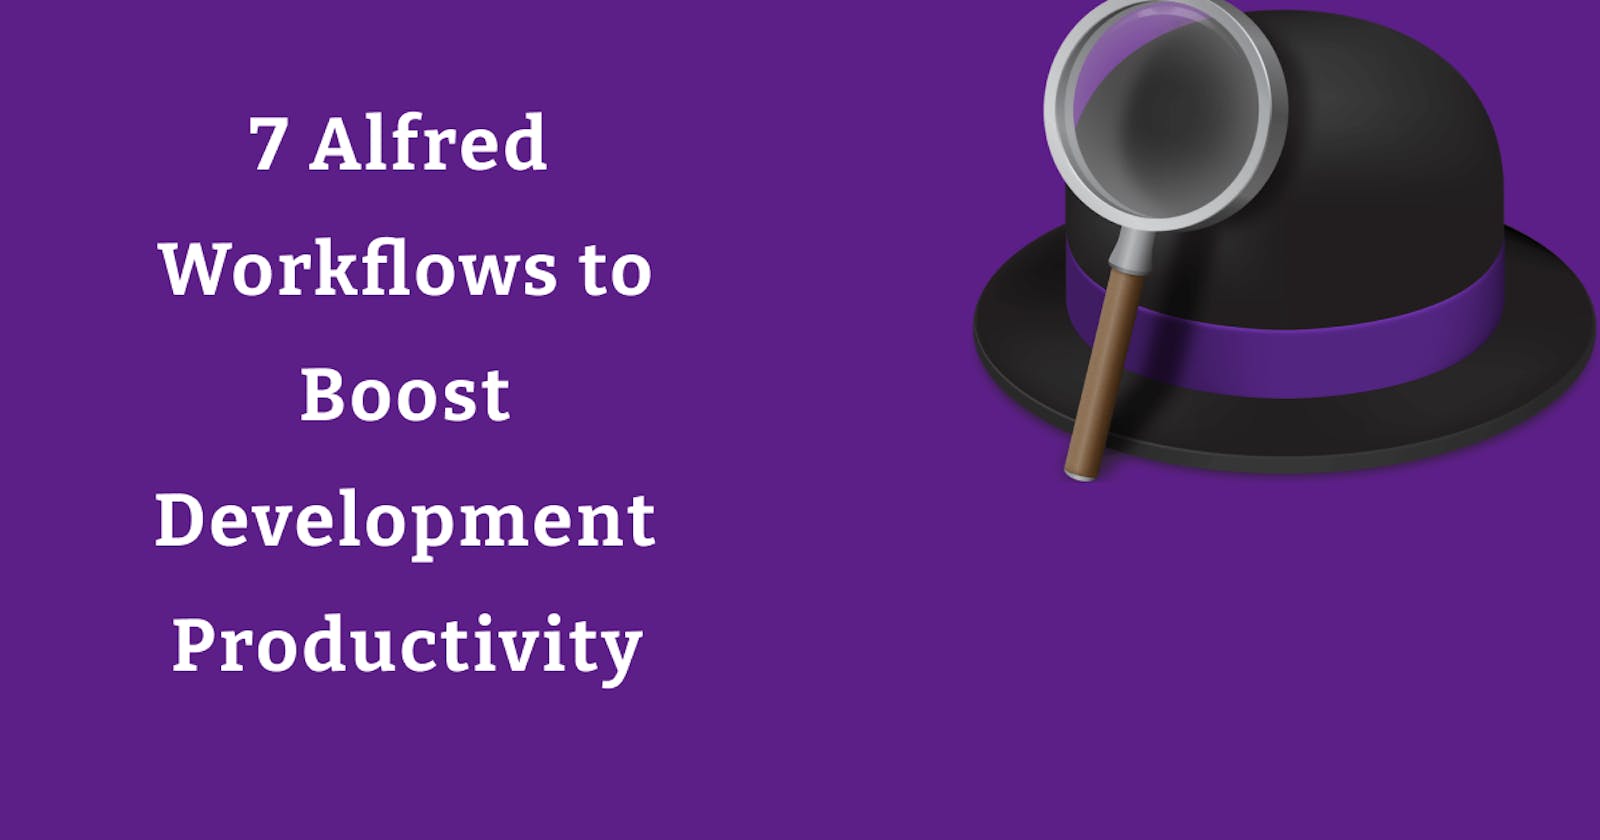 7 Alfred Workflows to Boost Development Productivity